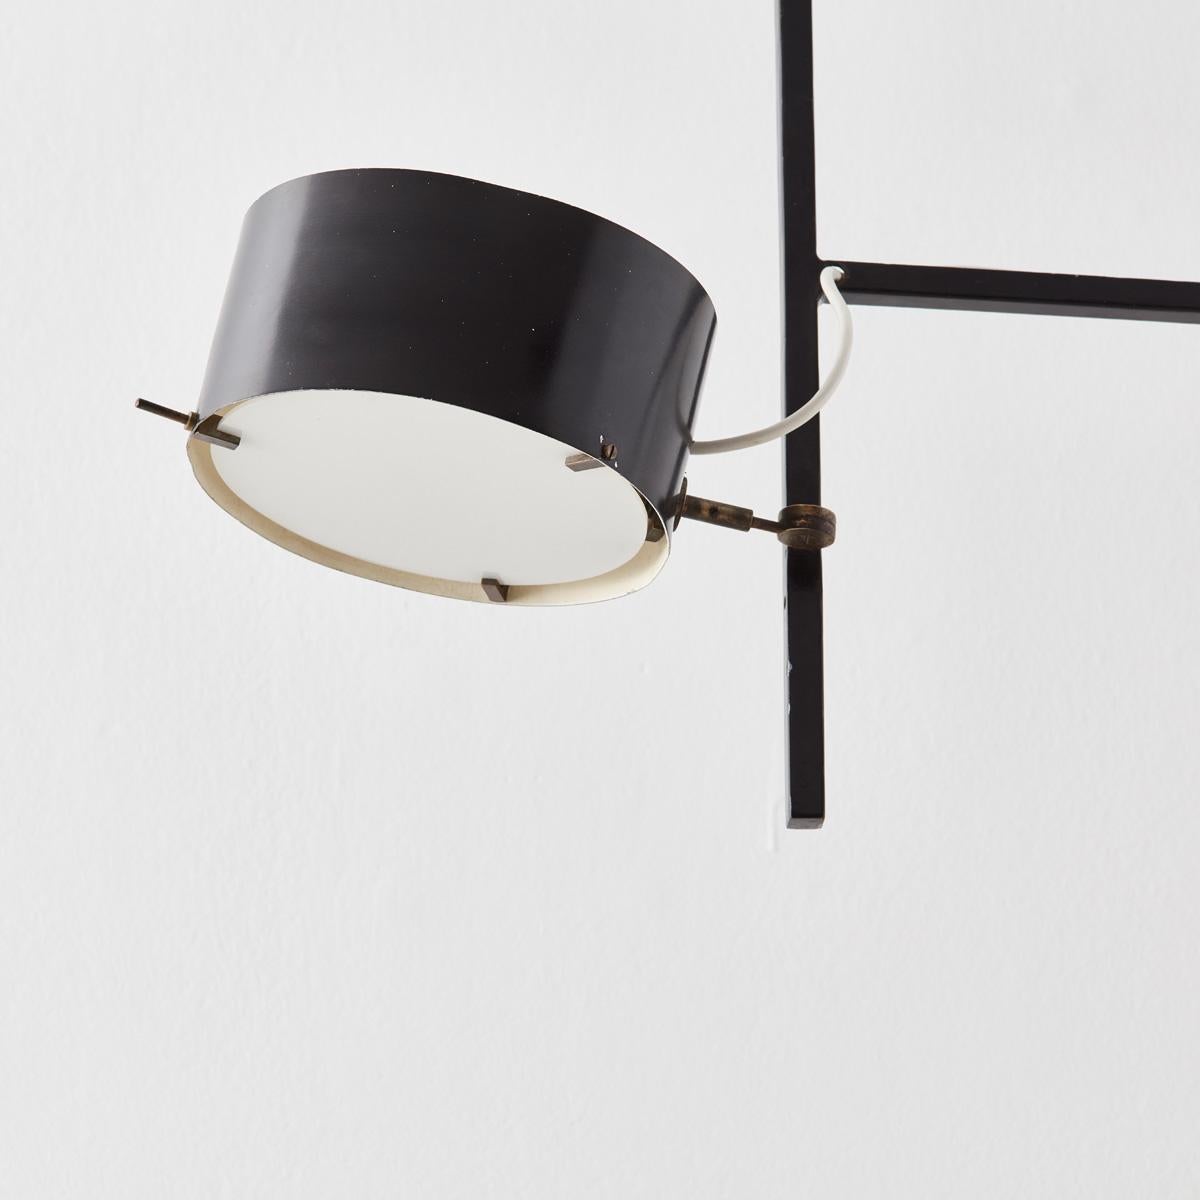 Steel Tito Agnoli Wall-to-Ceiling Lamp for Oluce, c1960 For Sale